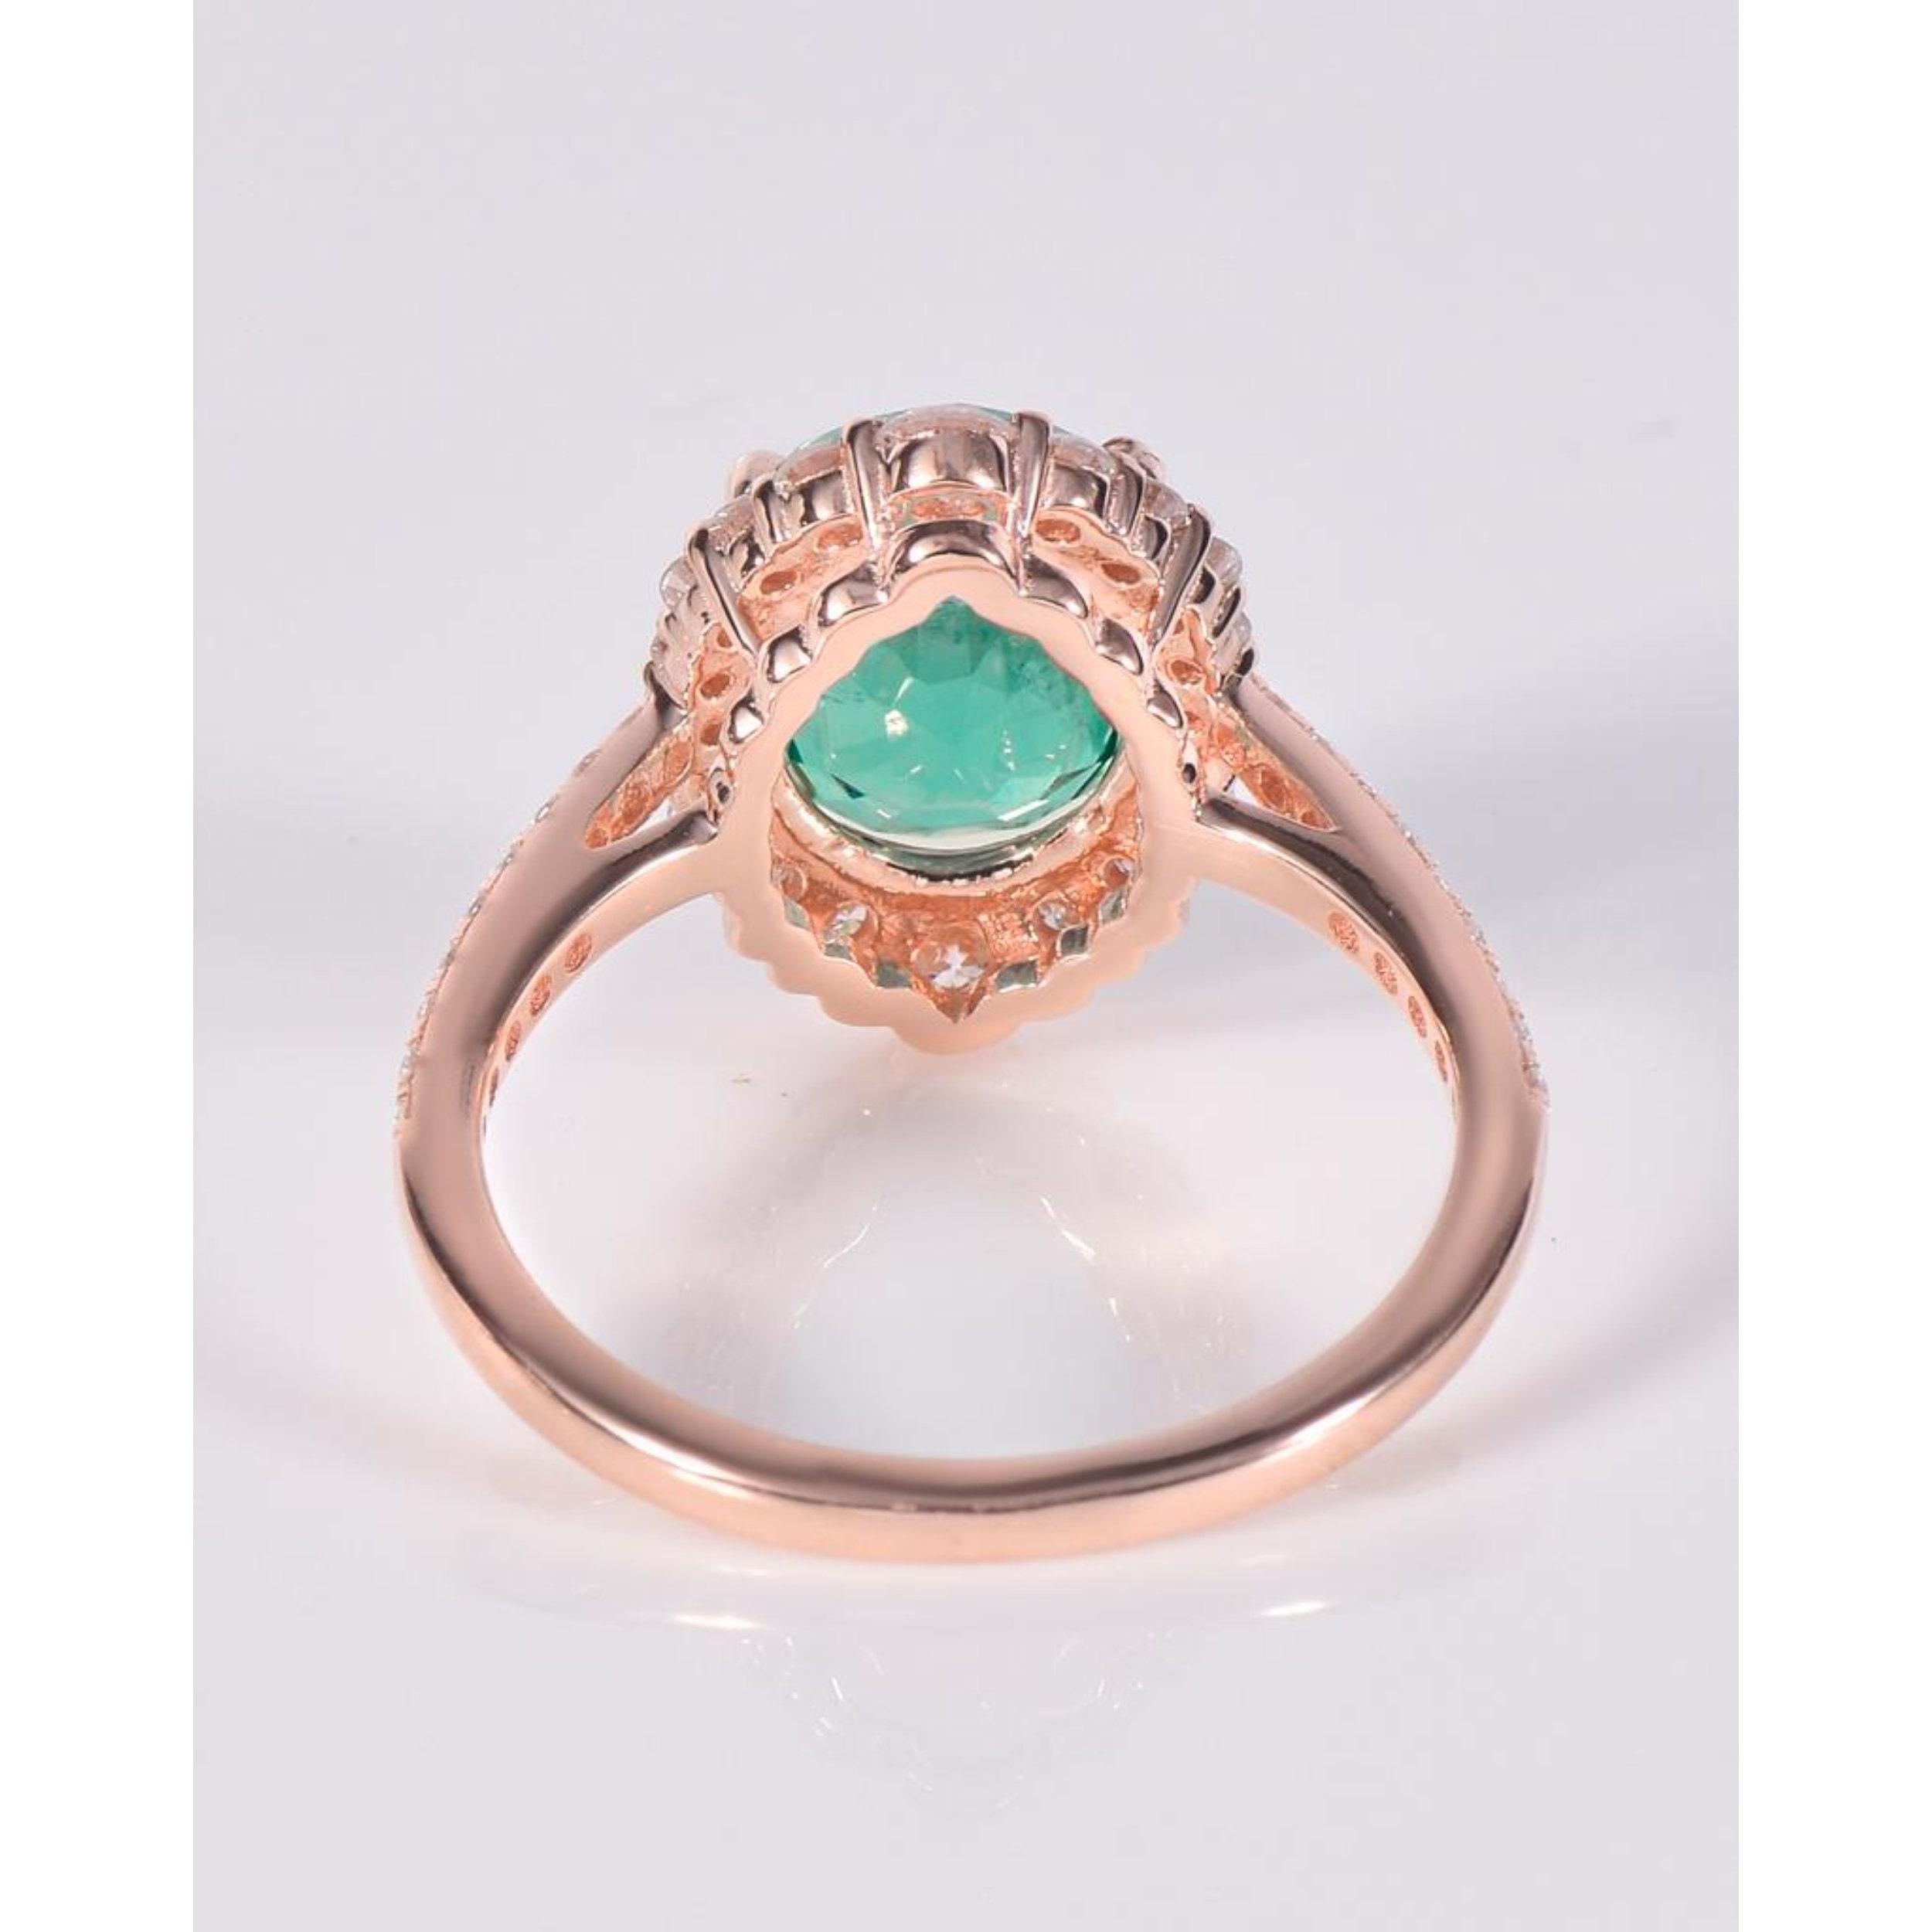 For Sale:  18K Gold 2 CT Natural Emerald and Diamond Antique Art Deco Style Engagement Ring 5